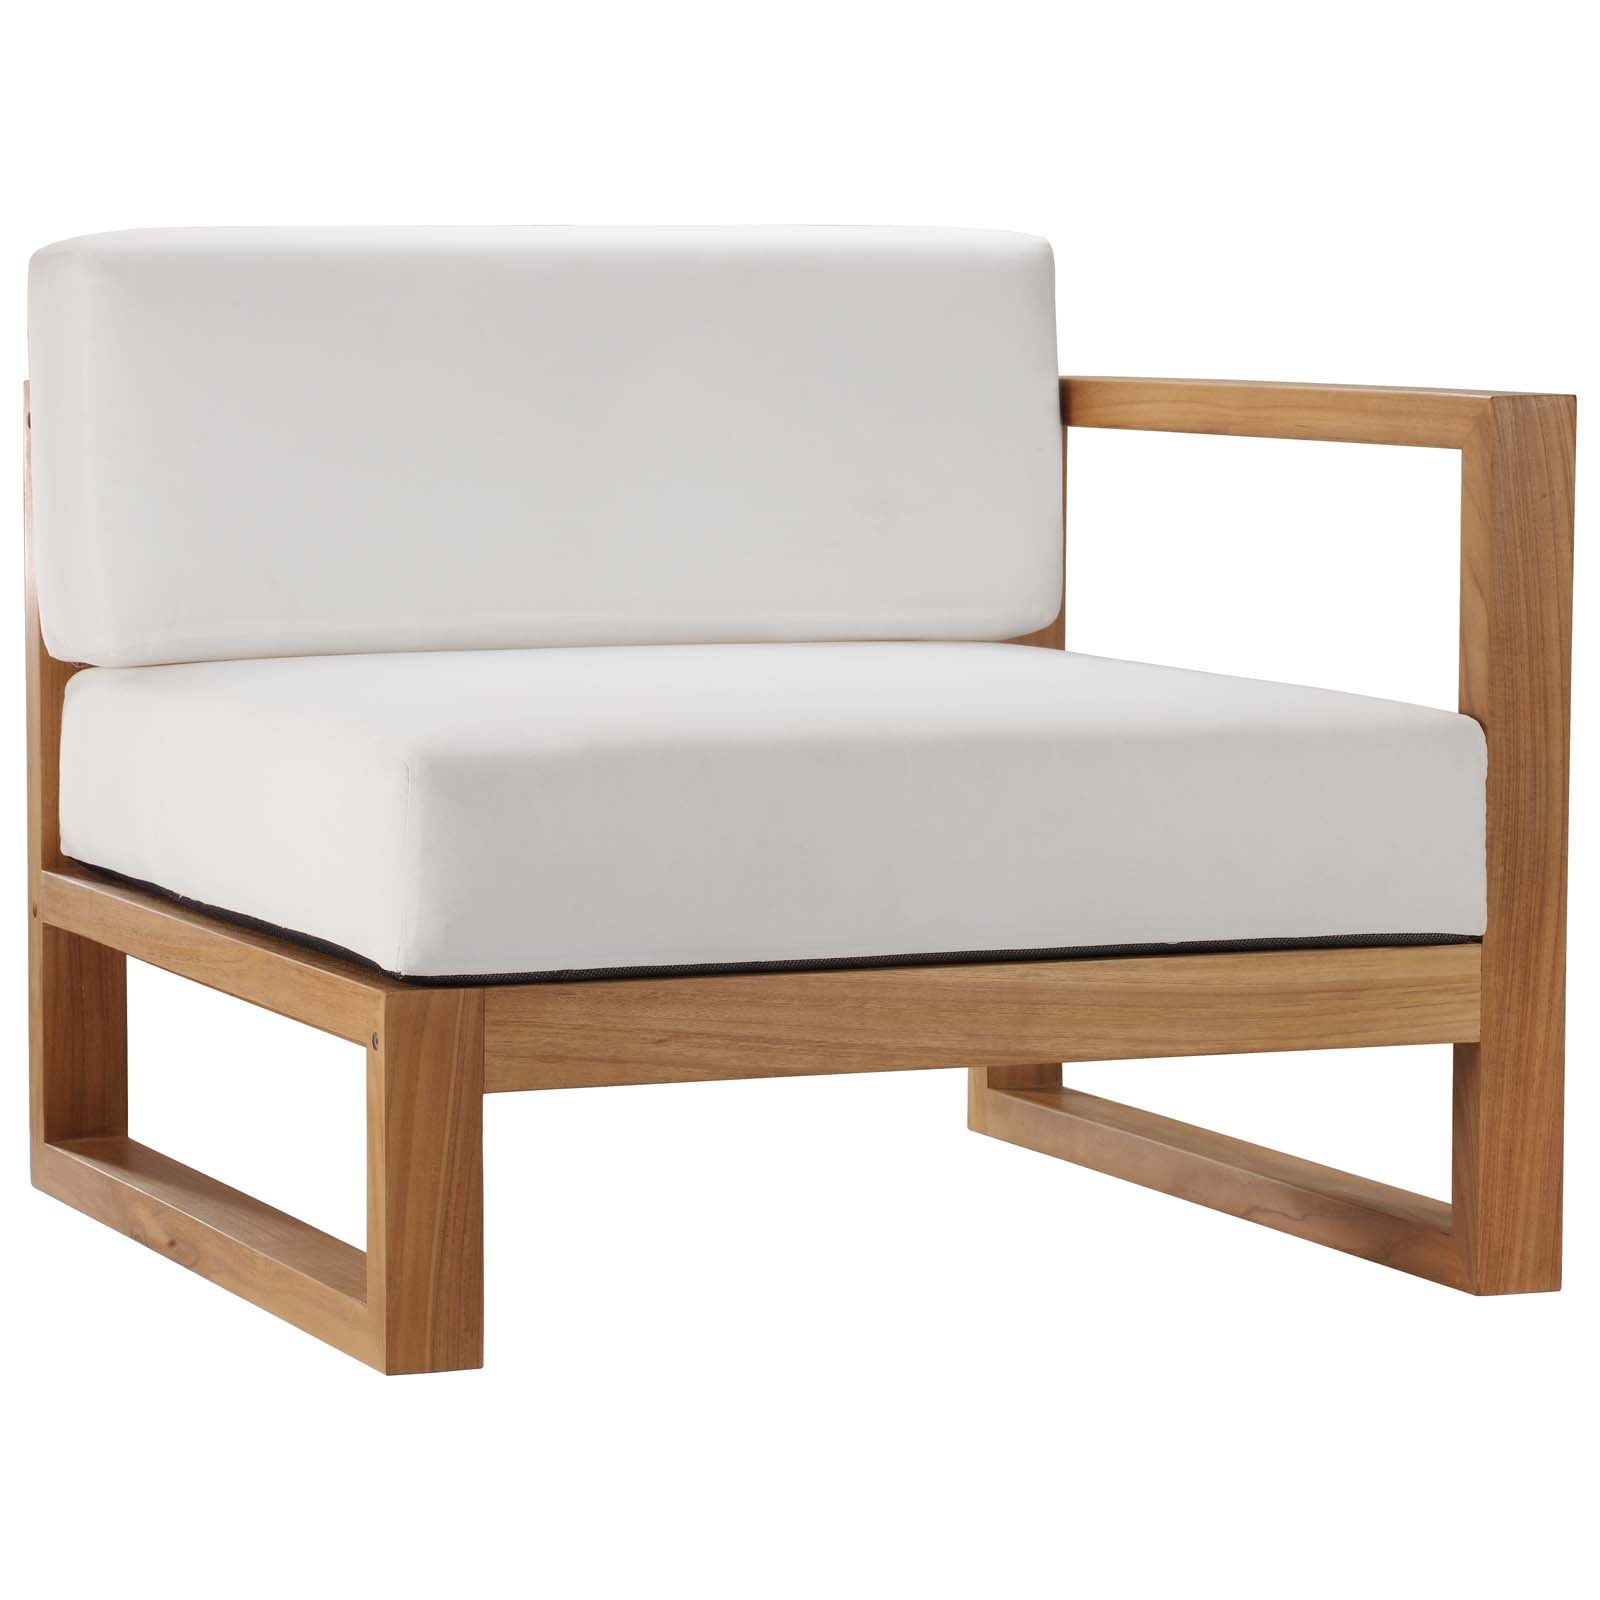 Modway Outdoor Conversation Sets - Upland Outdoor Patio Teak Wood 4-Piece Sectional Sofa Set Natural White